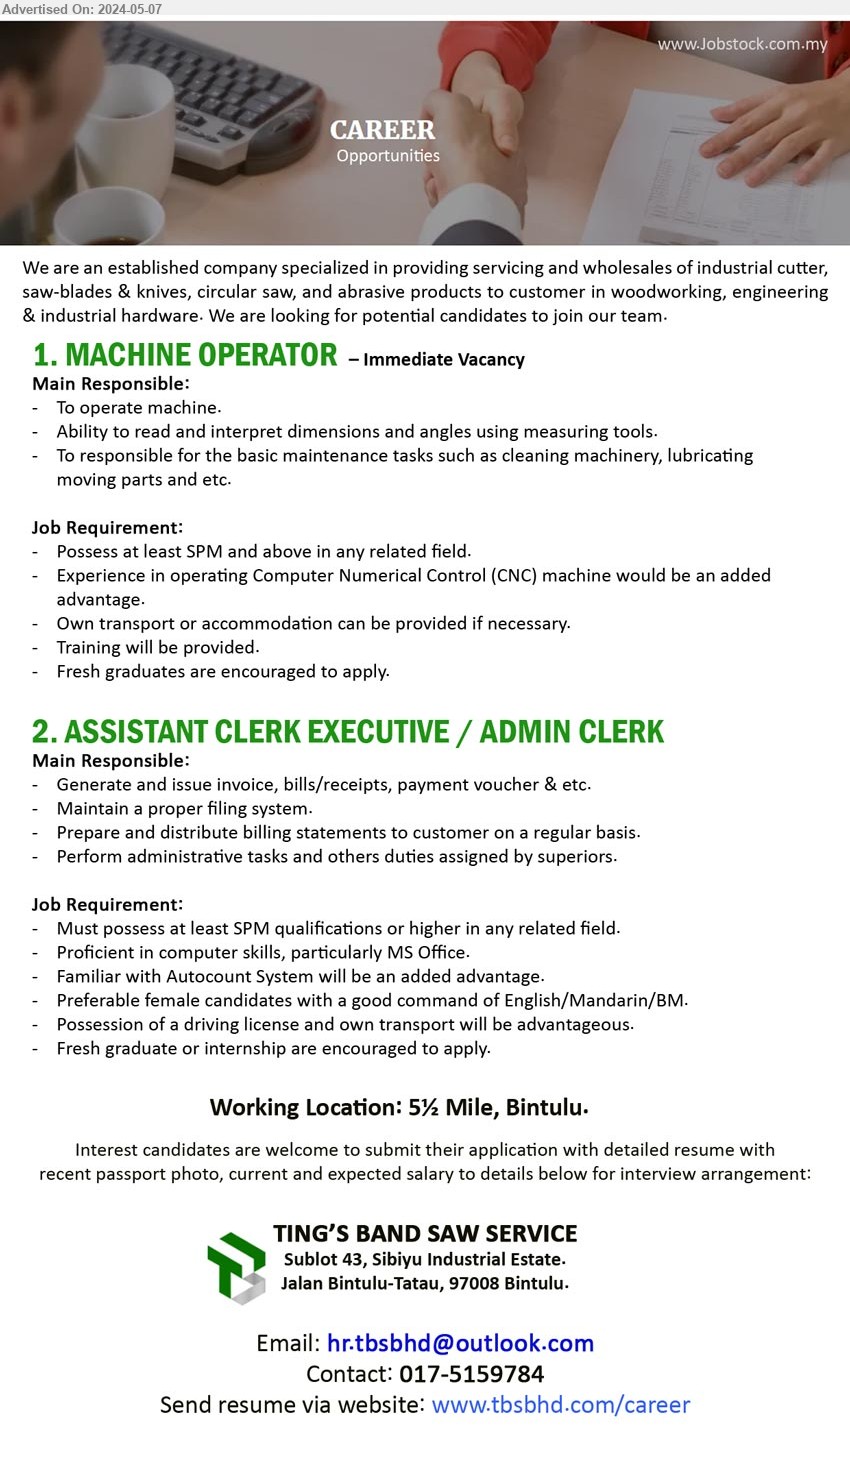 TING’S BAND SAW SERVICE - 1. MACHINE OPERATOR (Bintulu), SPM, Experience in operating Computer Numerical Control (CNC) machine would be an added 
advantage,...
2. ASSISTANT CLERK EXECUTIVE / ADMIN CLERK  (Bintulu), SPM, Proficient in computer skills, particularly MS Office, Familiar with Autocount System will be an added advantage.,...
Contact: 017-5159784 / Email resume to ...